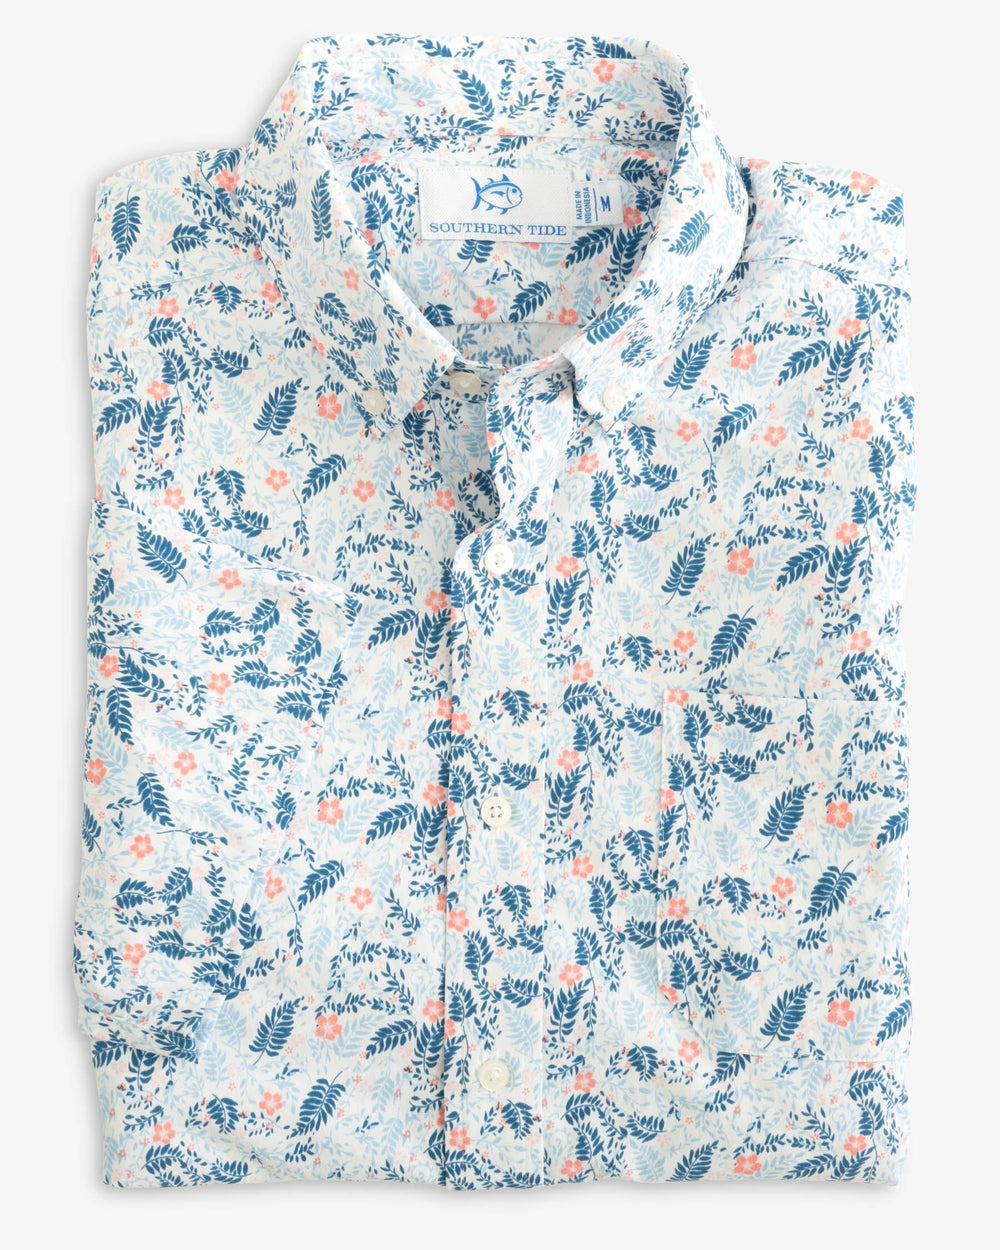 The fold view of the Southern Tide Barely Botanical Intercoastal Short Sleeve Button Down Shirt by Southern Tide - Classic White